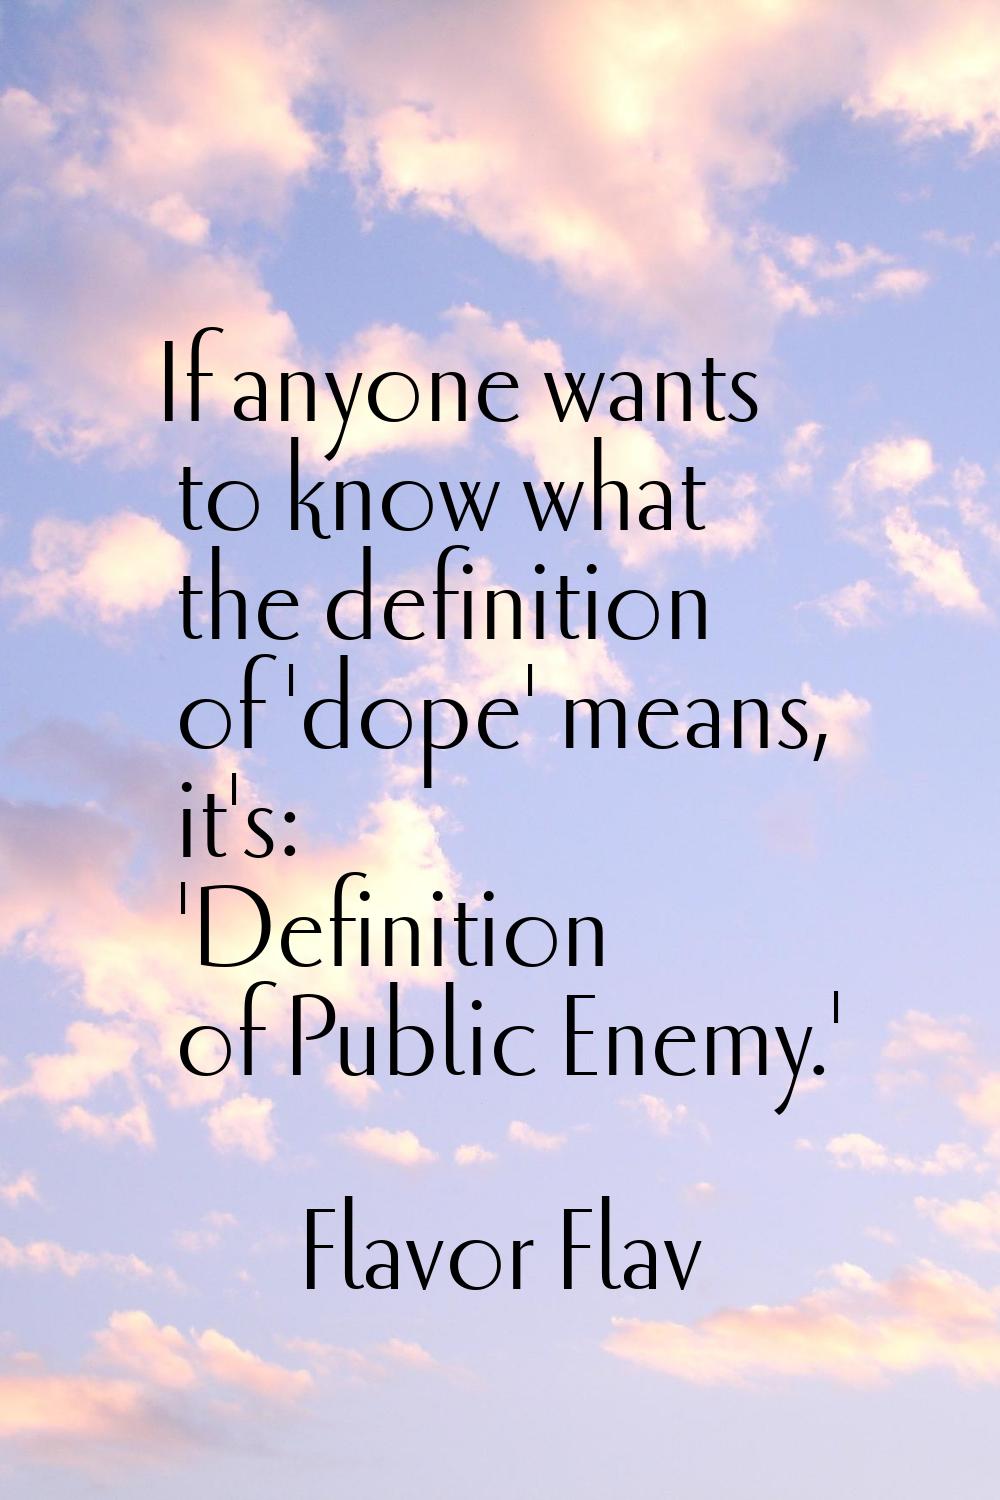 If anyone wants to know what the definition of 'dope' means, it's: 'Definition of Public Enemy.'